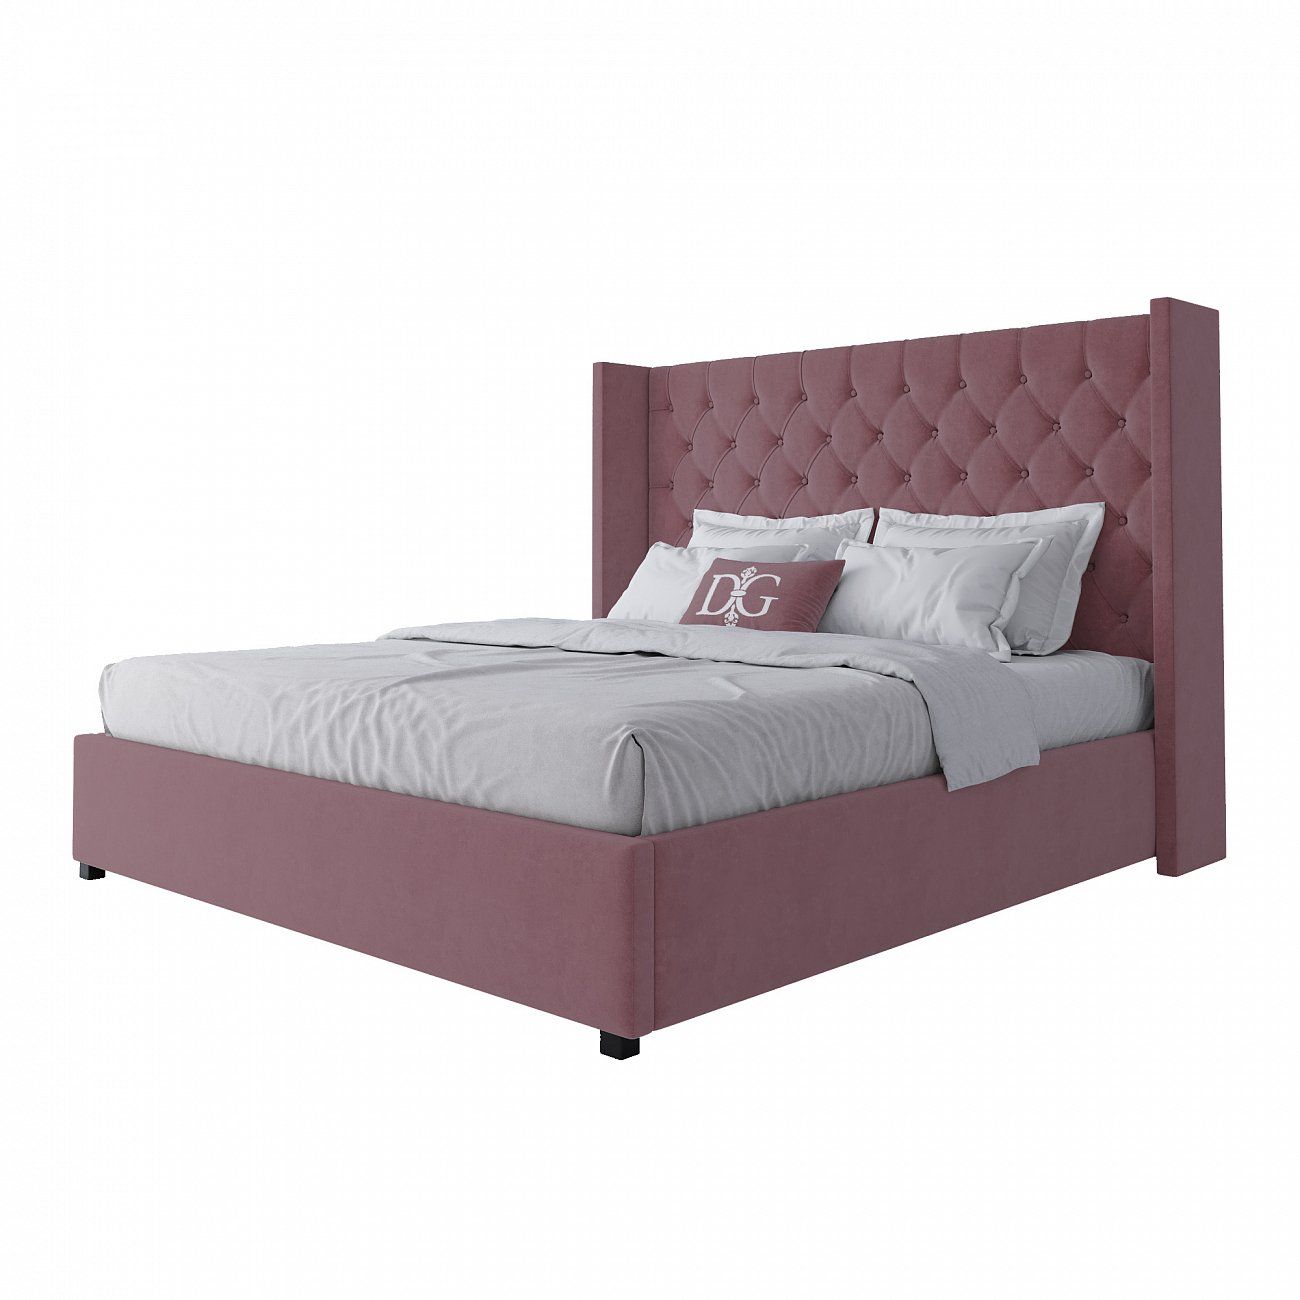 Double bed with upholstered headboard 180x200 cm Dusty Rose Wing-2